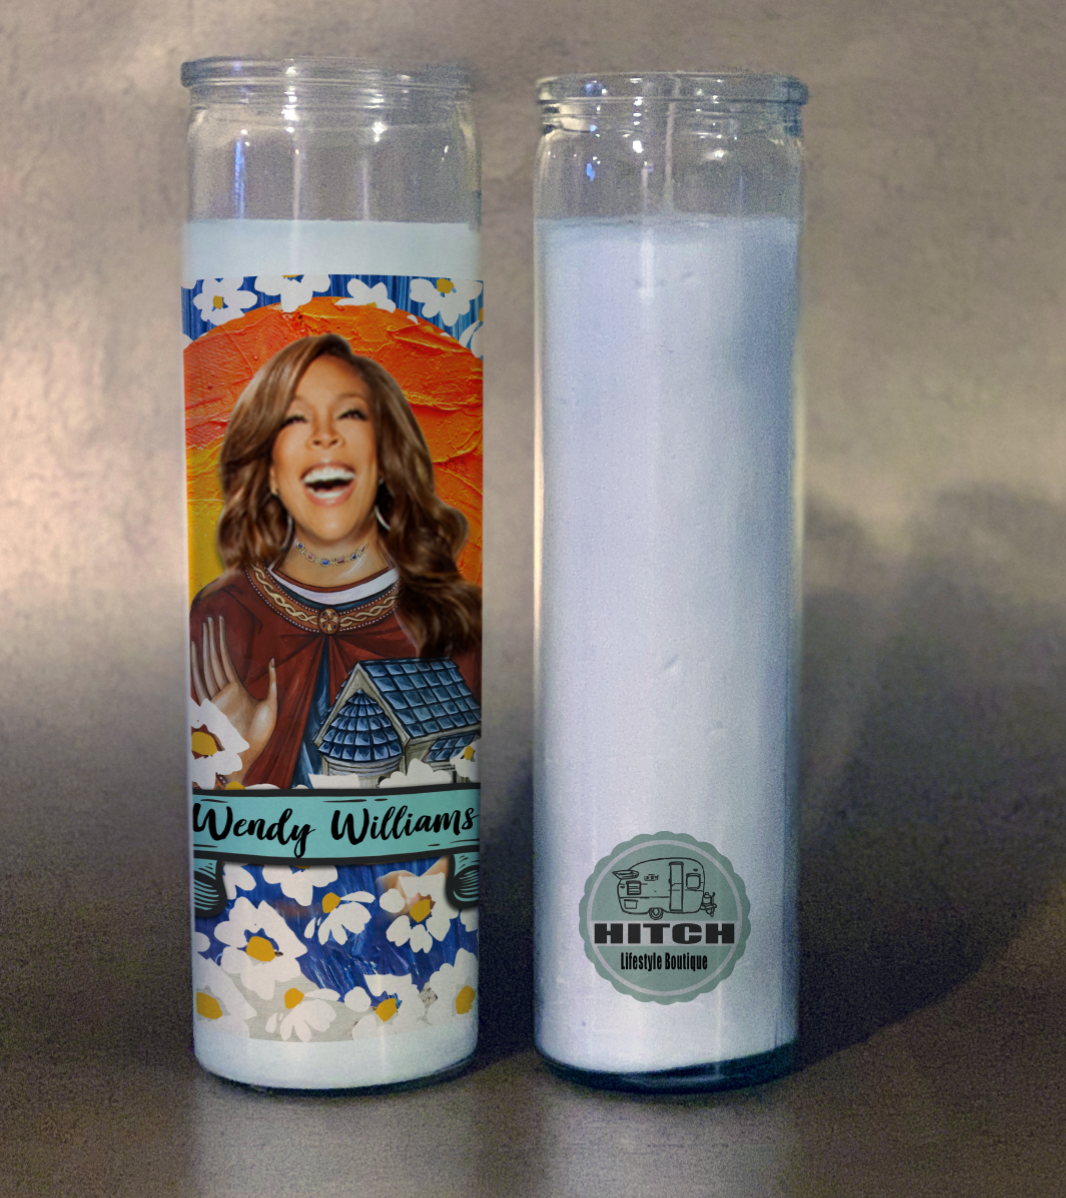 Wendy Williams Prayer Candle.